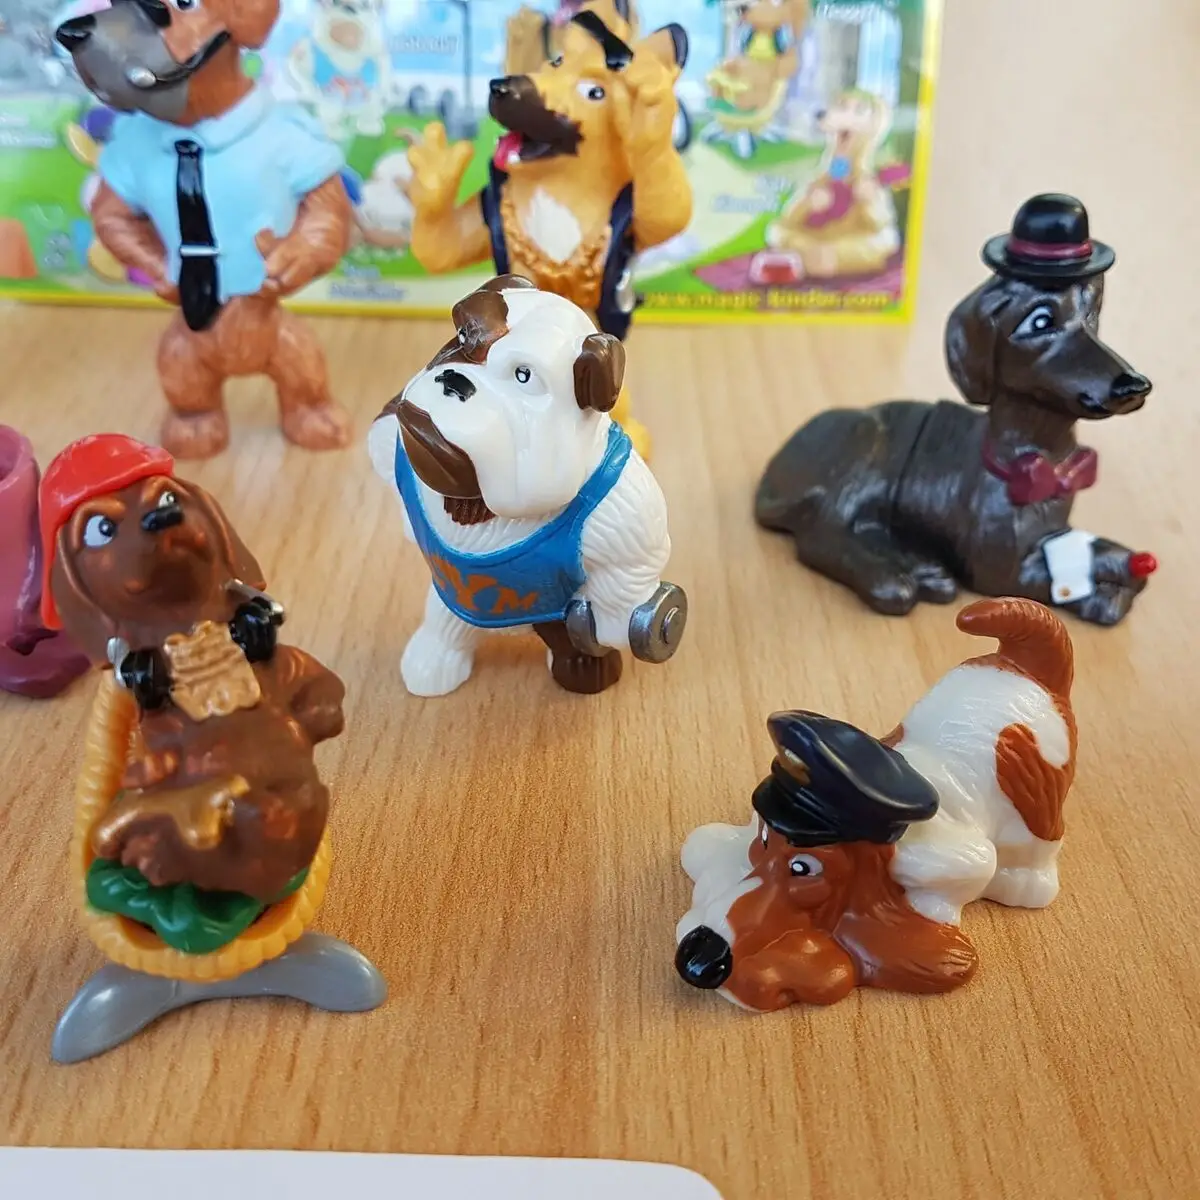 Toy Story Puppies The Perfect Addition to Your Family